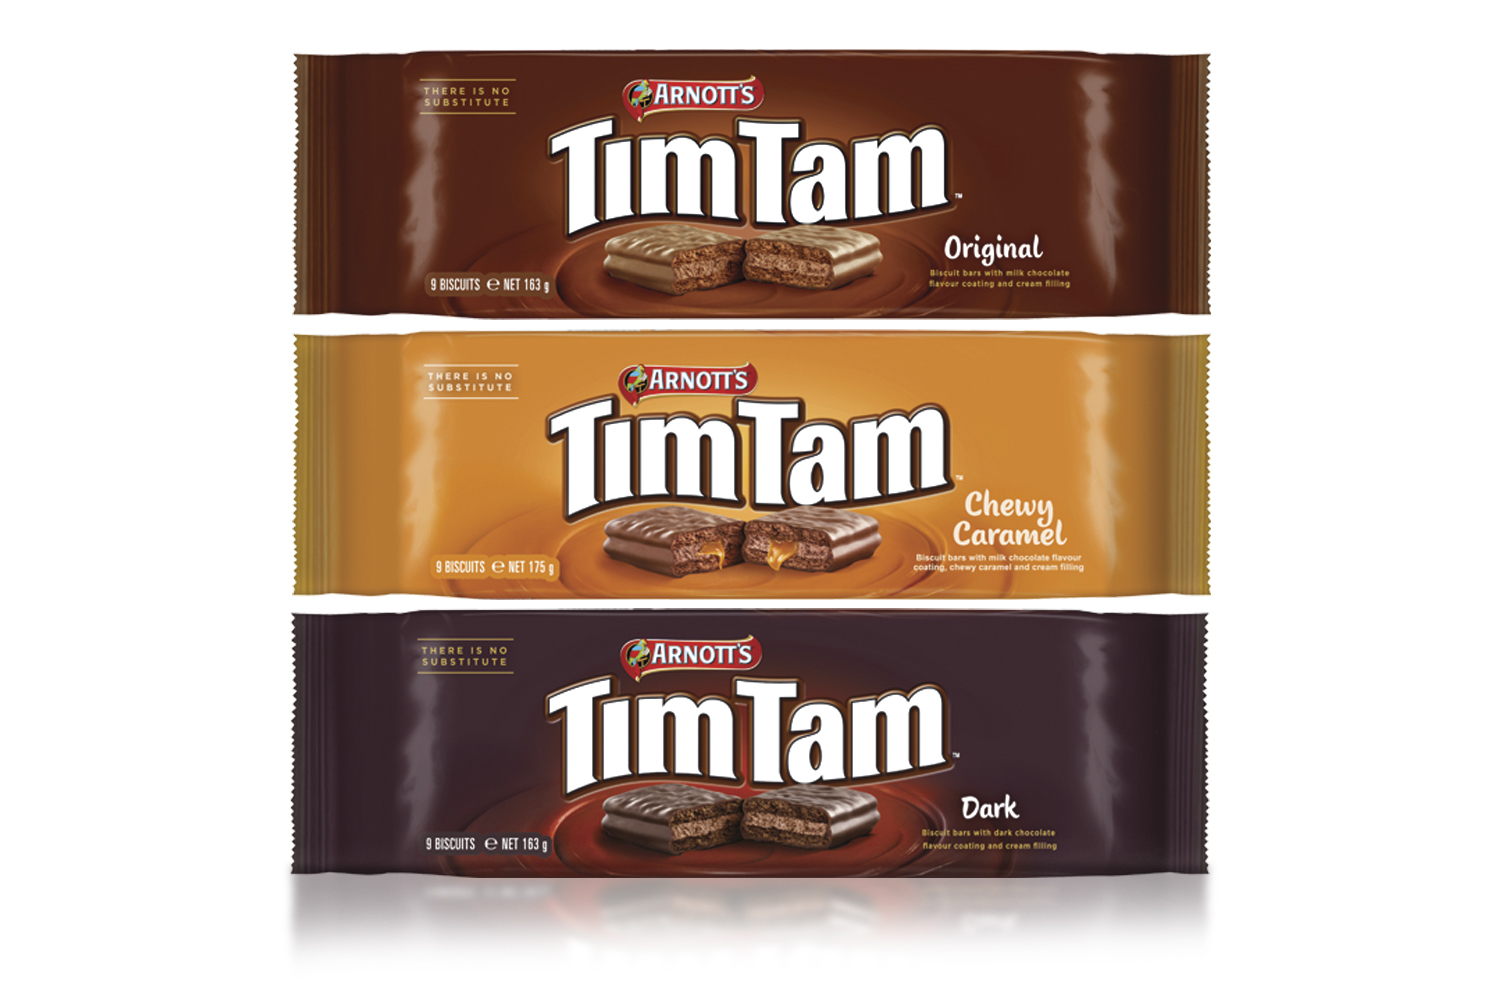 3 images of tim tams, dark, milk and chewy caramel